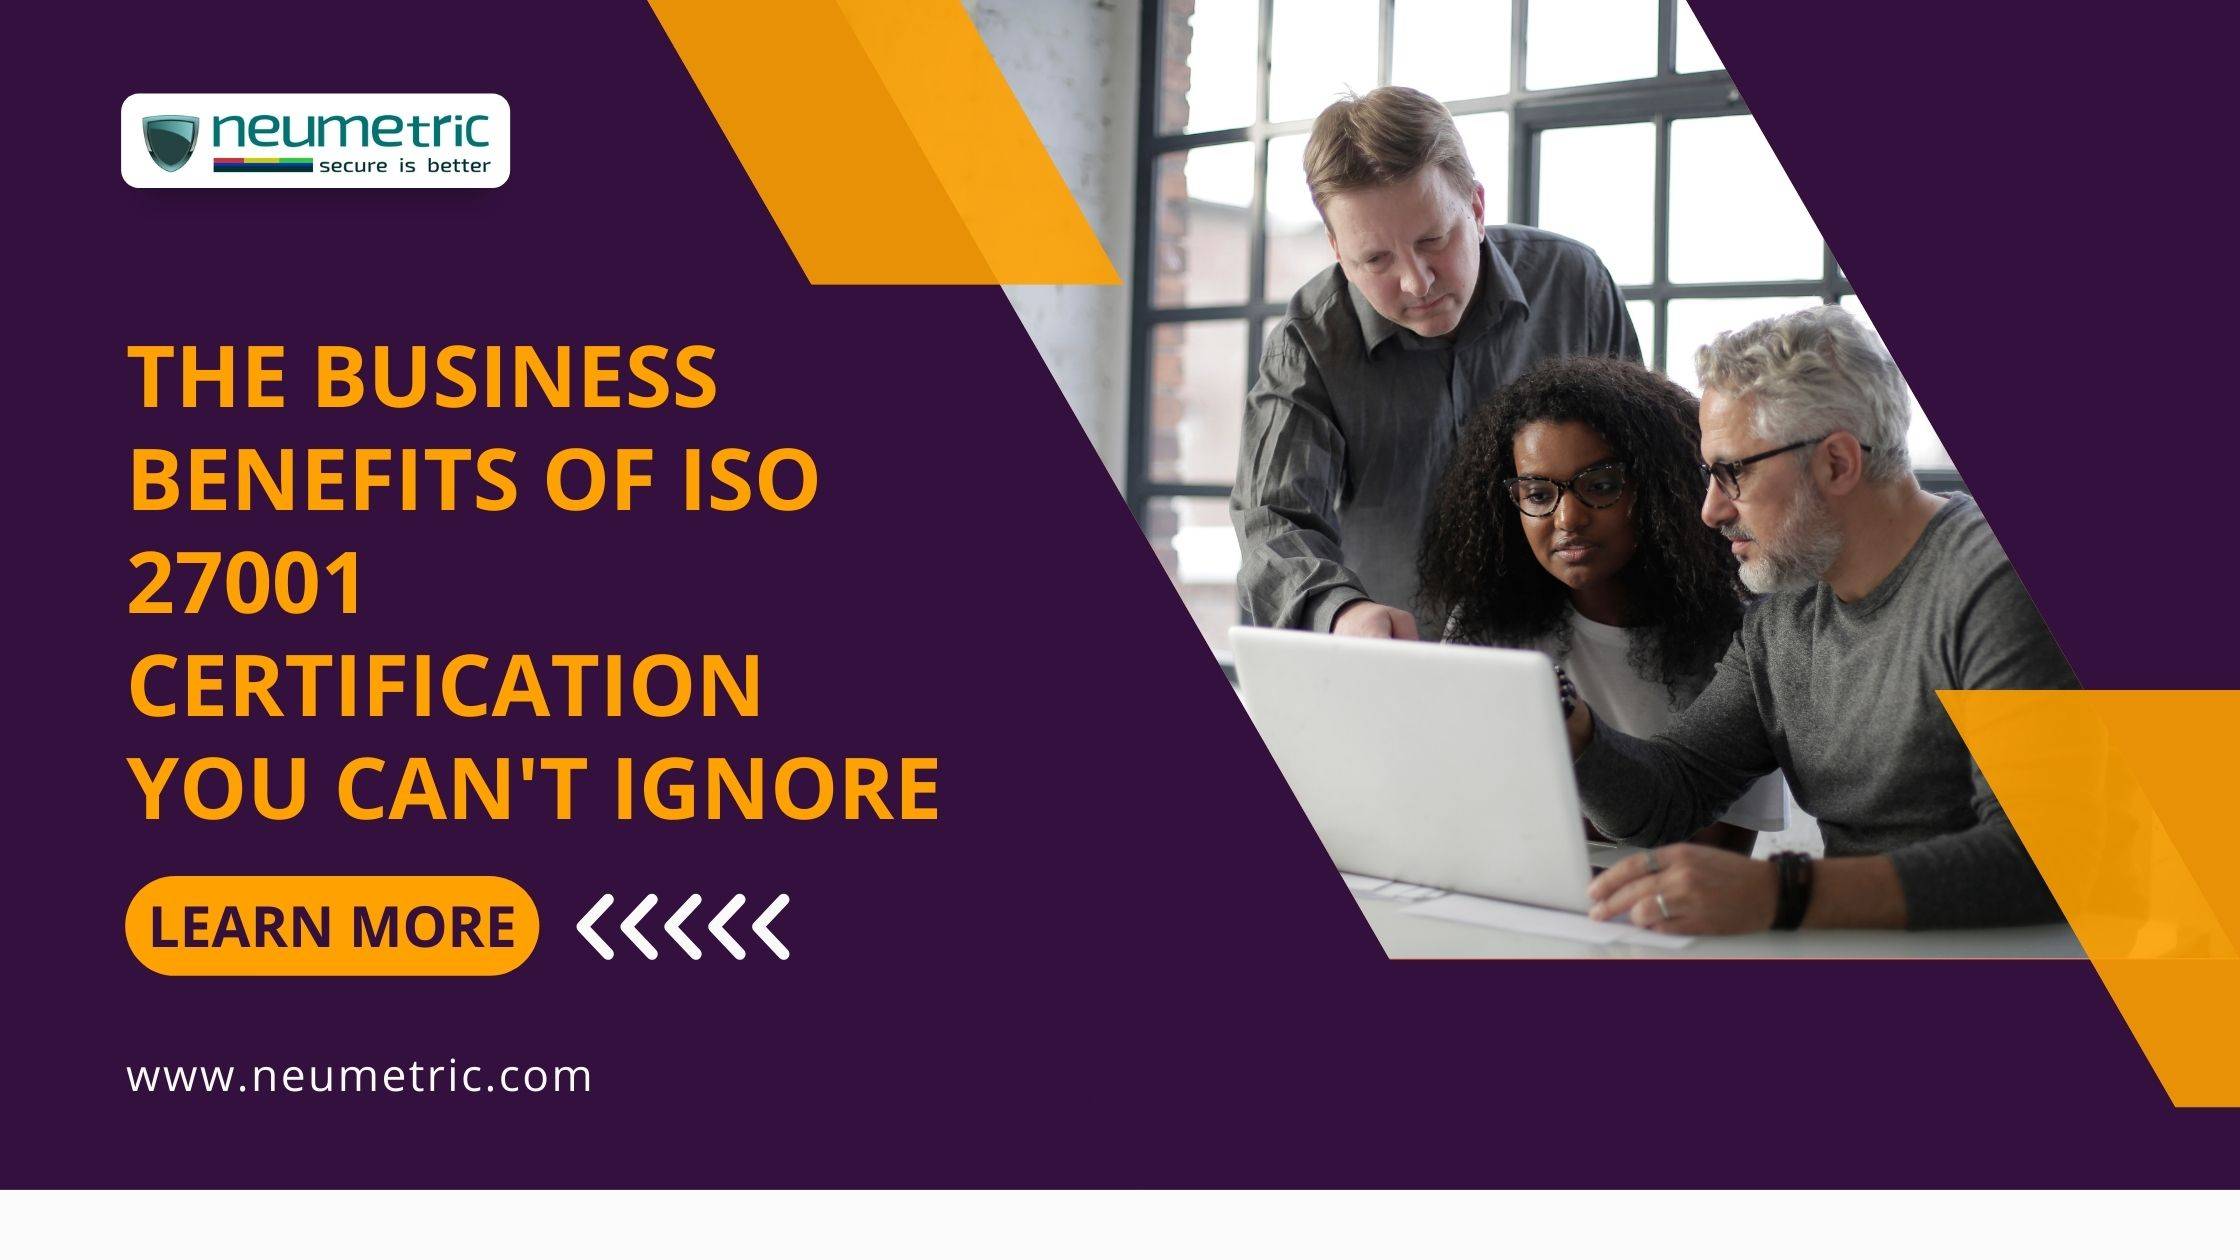 The Business Benefits of ISO 27001 Certification You Can’t Ignore